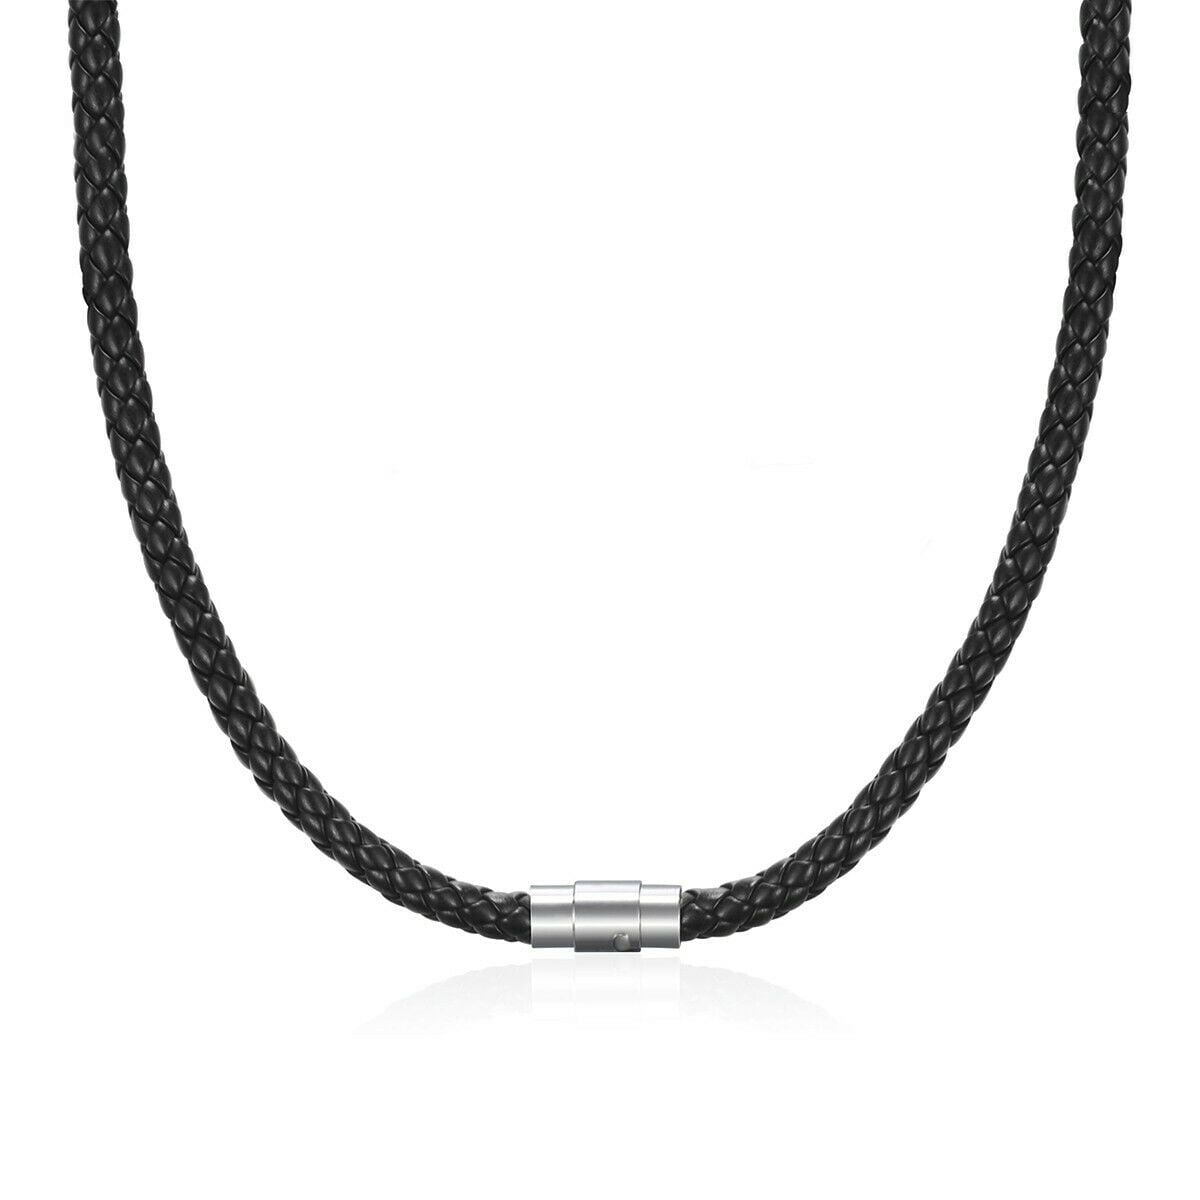 Braided Leather Necklaces | Atkinson Art Jewellery |